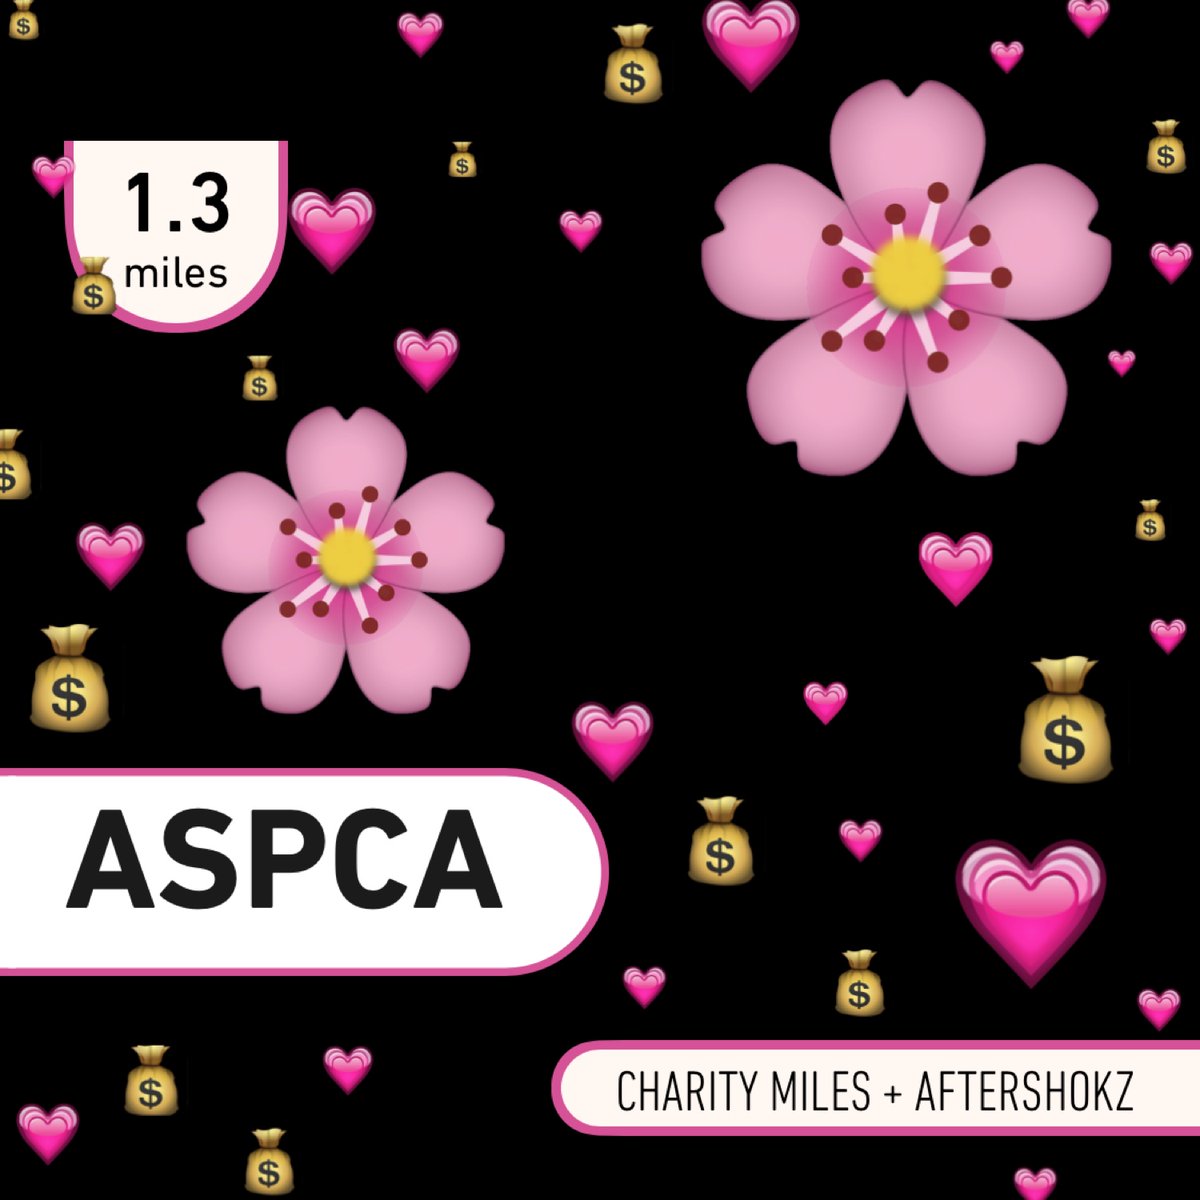 28° 🌌 🥶 crispy cold to jumpstarts your Monday 🔦🐼🐾1.3 @CharityMiles for @TeamASPCA. Thx @Aftershokz . #ShokzMiles charitymiles.org/aftershokz